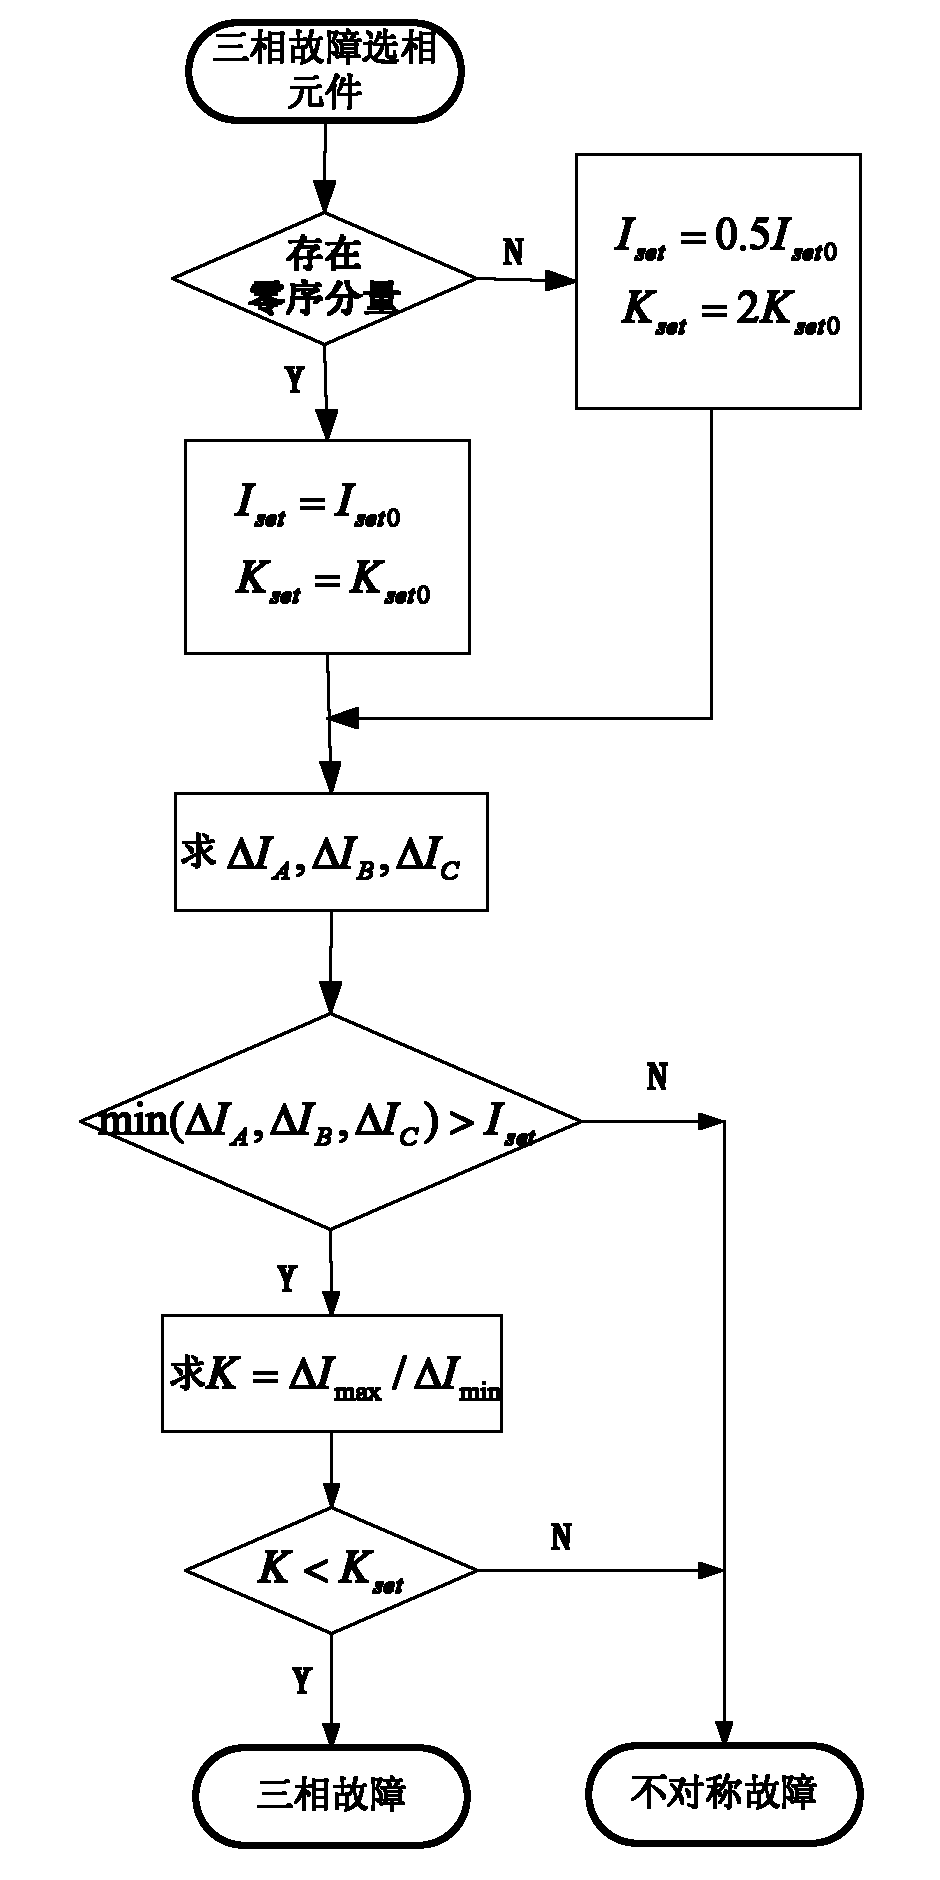 Adaptive three-phase symmetric fault phase selecting method for ultra high voltage transmission line